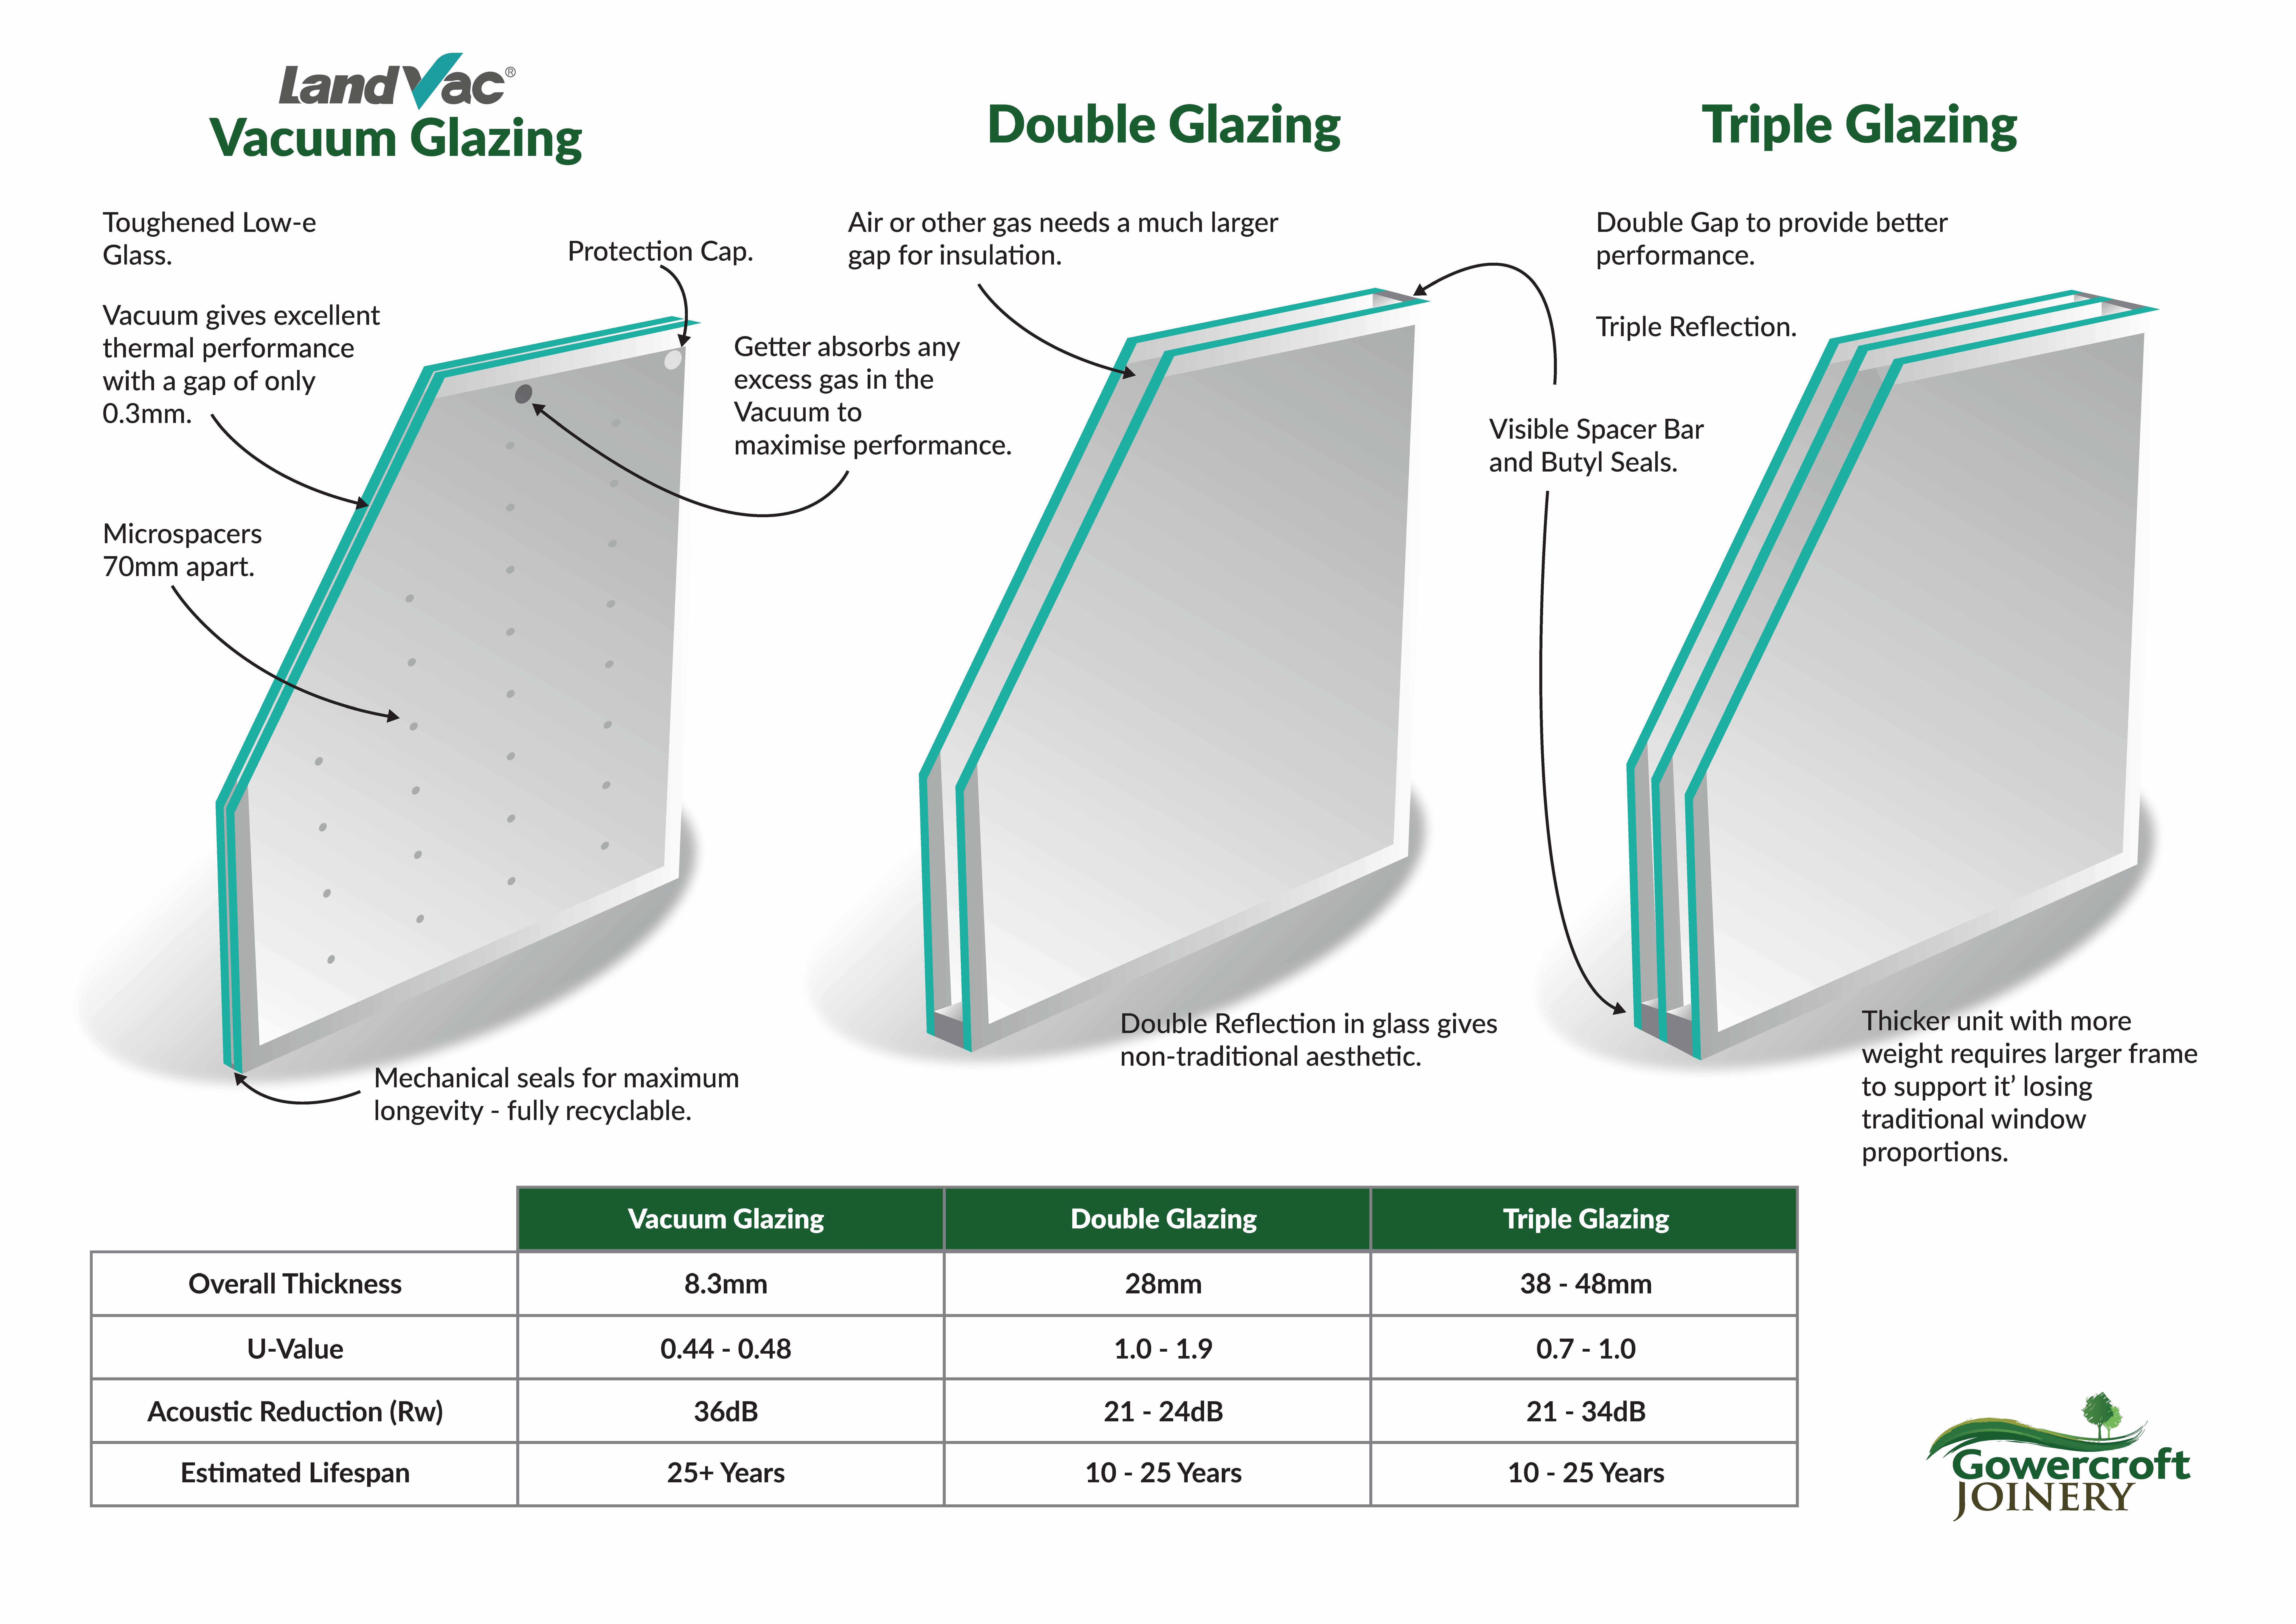 Double Glazing diagram comparing vacuum glass to standard and triple glazing